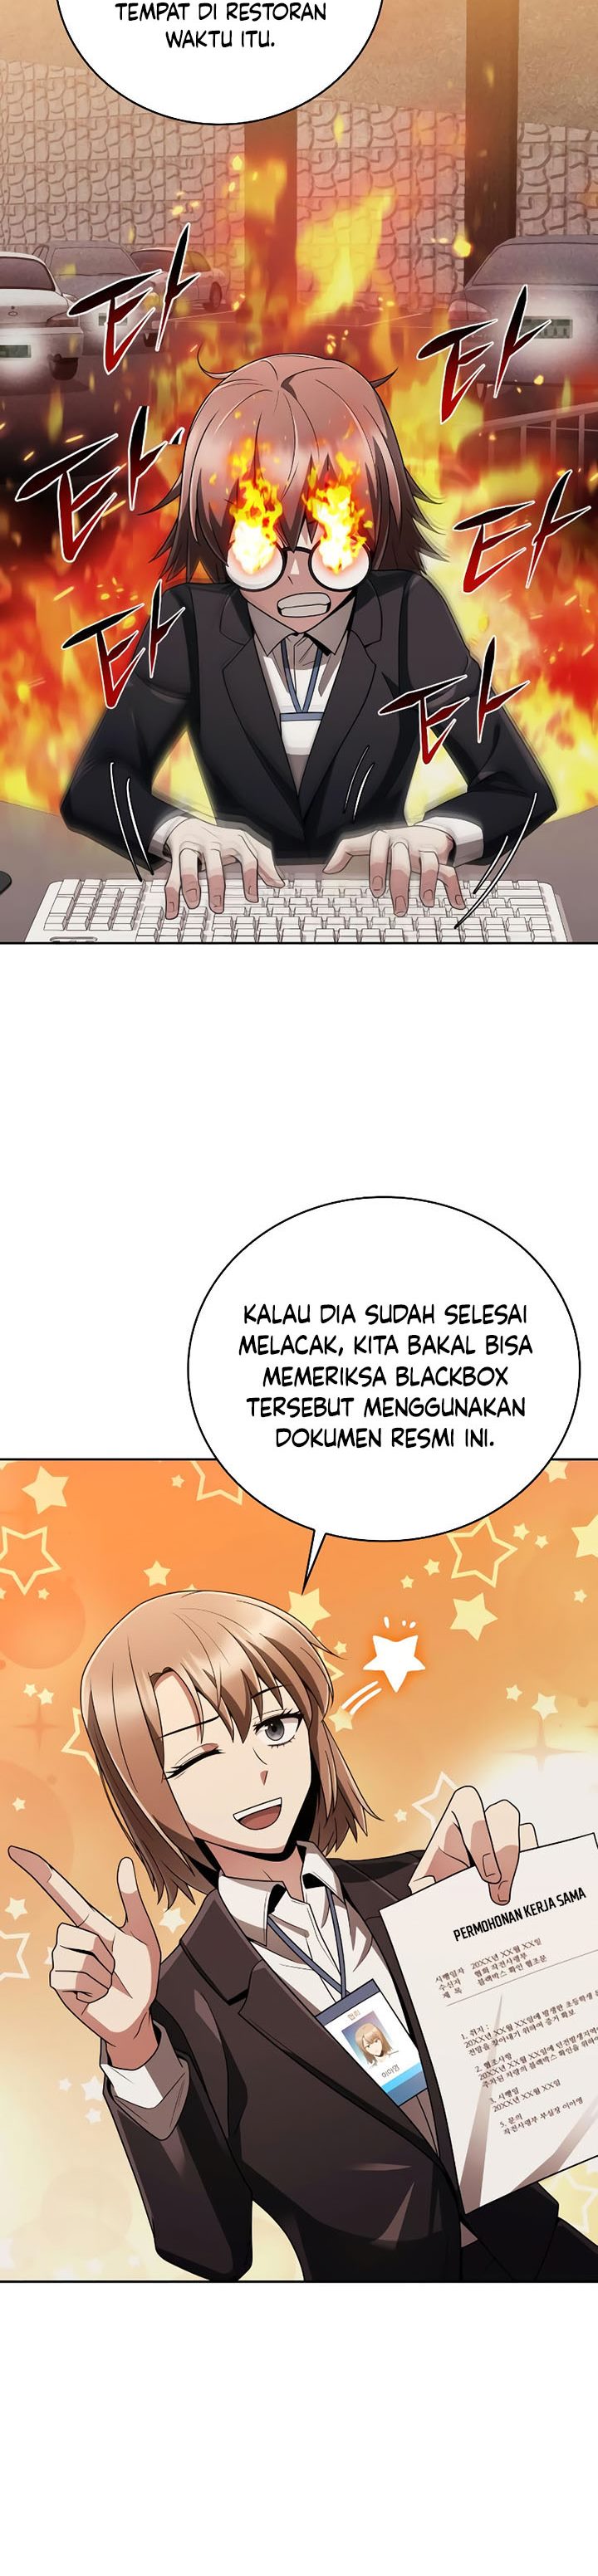 Dilarang COPAS - situs resmi www.mangacanblog.com - Komik clever cleaning life of the returned genius hunter 020 - chapter 20 21 Indonesia clever cleaning life of the returned genius hunter 020 - chapter 20 Terbaru 21|Baca Manga Komik Indonesia|Mangacan